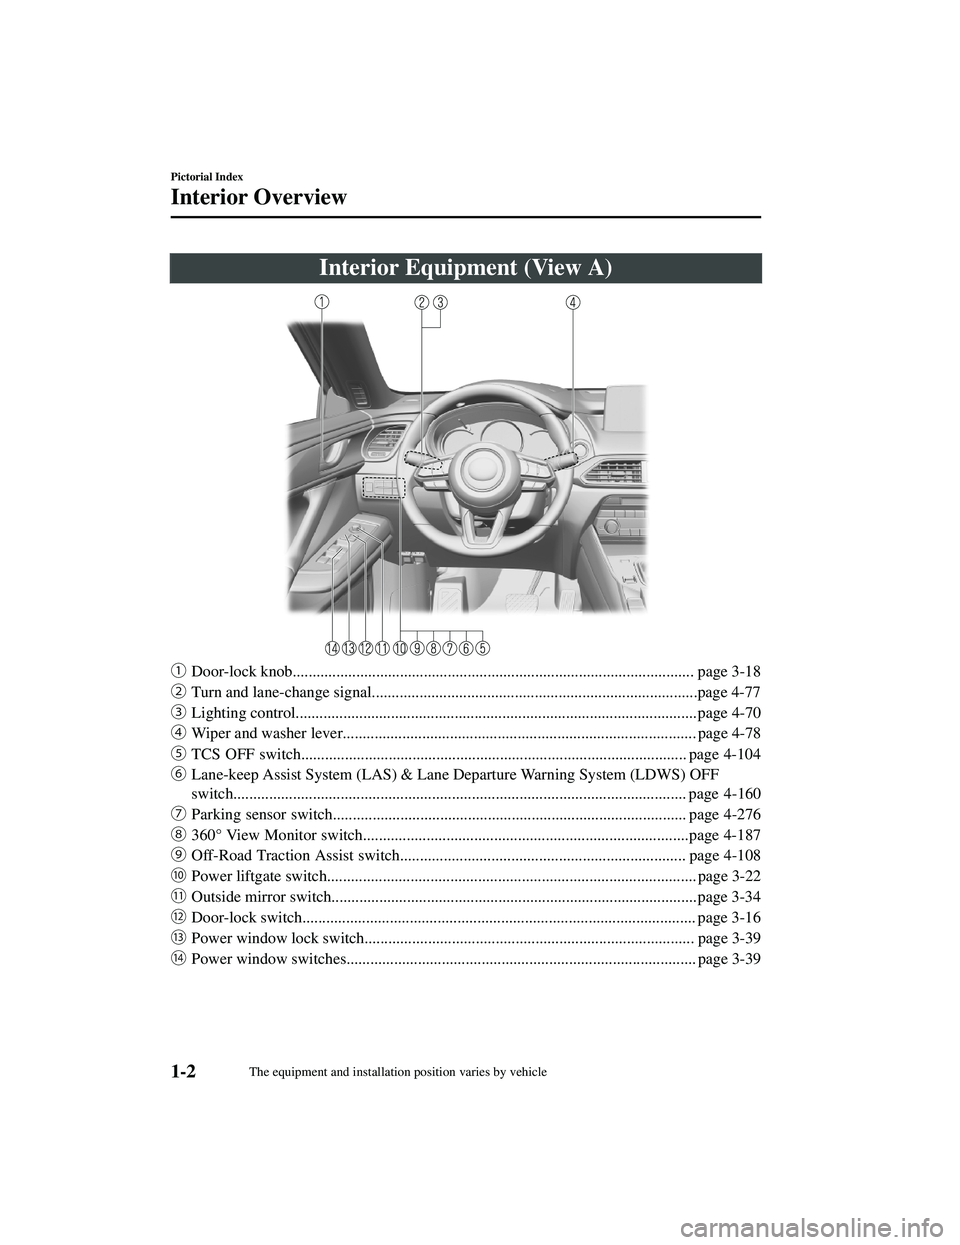 MAZDA MODEL CX-9 2021  Owners Manual Interior Equipment (View A)
ƒDoor-lock knob..................................................................................................... page 3-18
„ Turn and lane-change signal...........